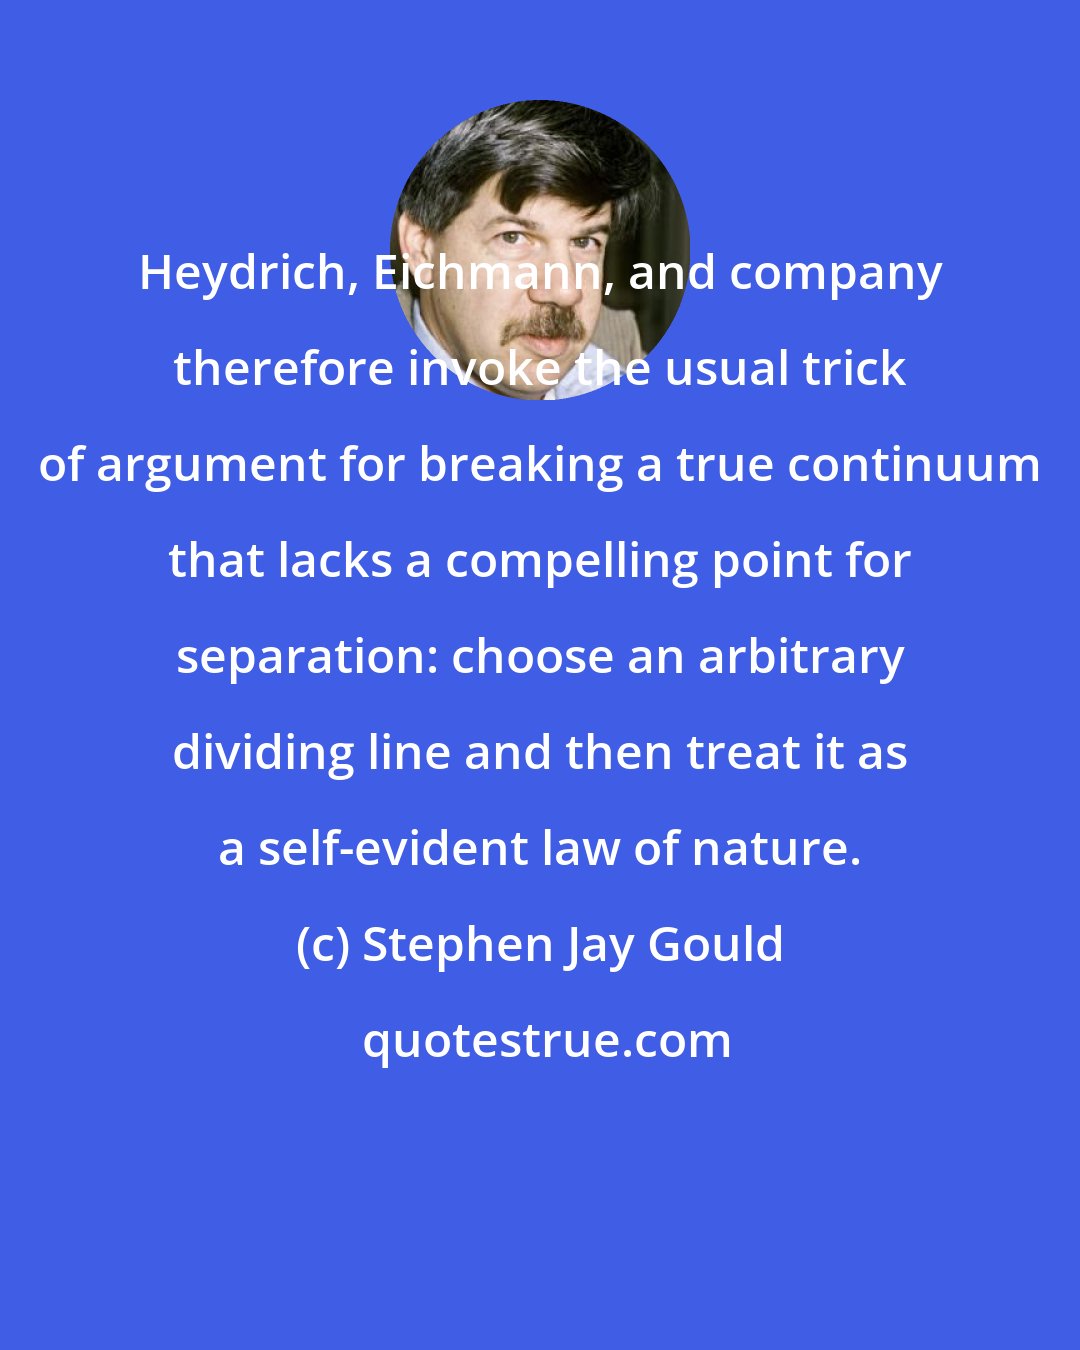 Stephen Jay Gould: Heydrich, Eichmann, and company therefore invoke the usual trick of argument for breaking a true continuum that lacks a compelling point for separation: choose an arbitrary dividing line and then treat it as a self-evident law of nature.